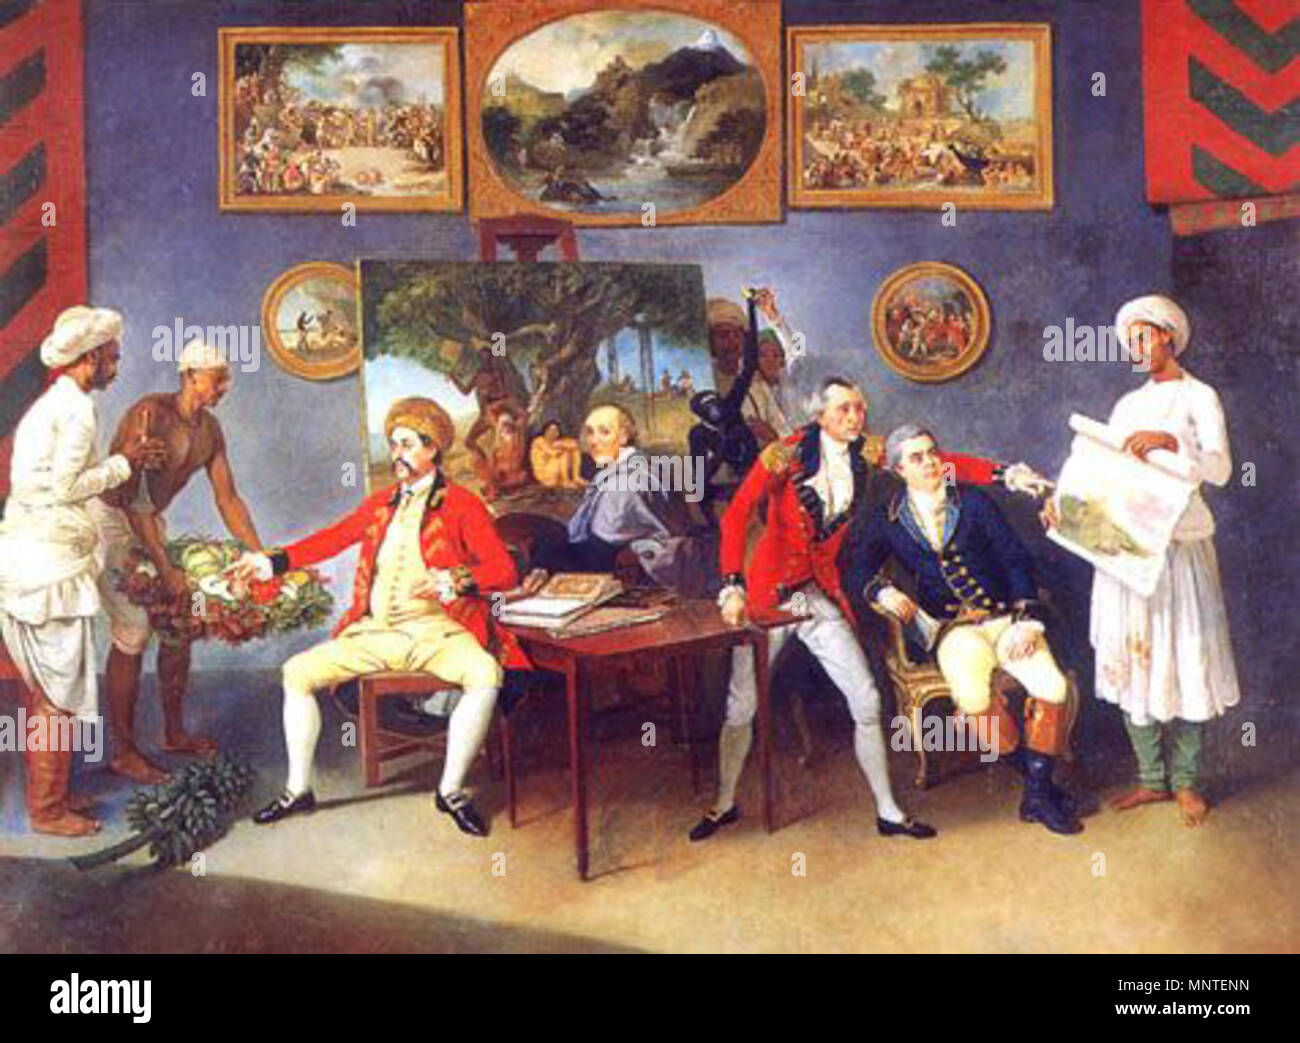 Colonel Antoine Polier, Claude Martin and John Wombwell with the Artist . This is a painting by Johann Zoffany of Colonel Antoine Polier, Claude Martin, John Wombwell with himself in the background being waited on by Indian servants probably in Lucknow India. The painting is now in the Victoria Museum Calcutta. This image is from their web site. July 1786.   1011 PolierMartinWombwellZoffany Stock Photo